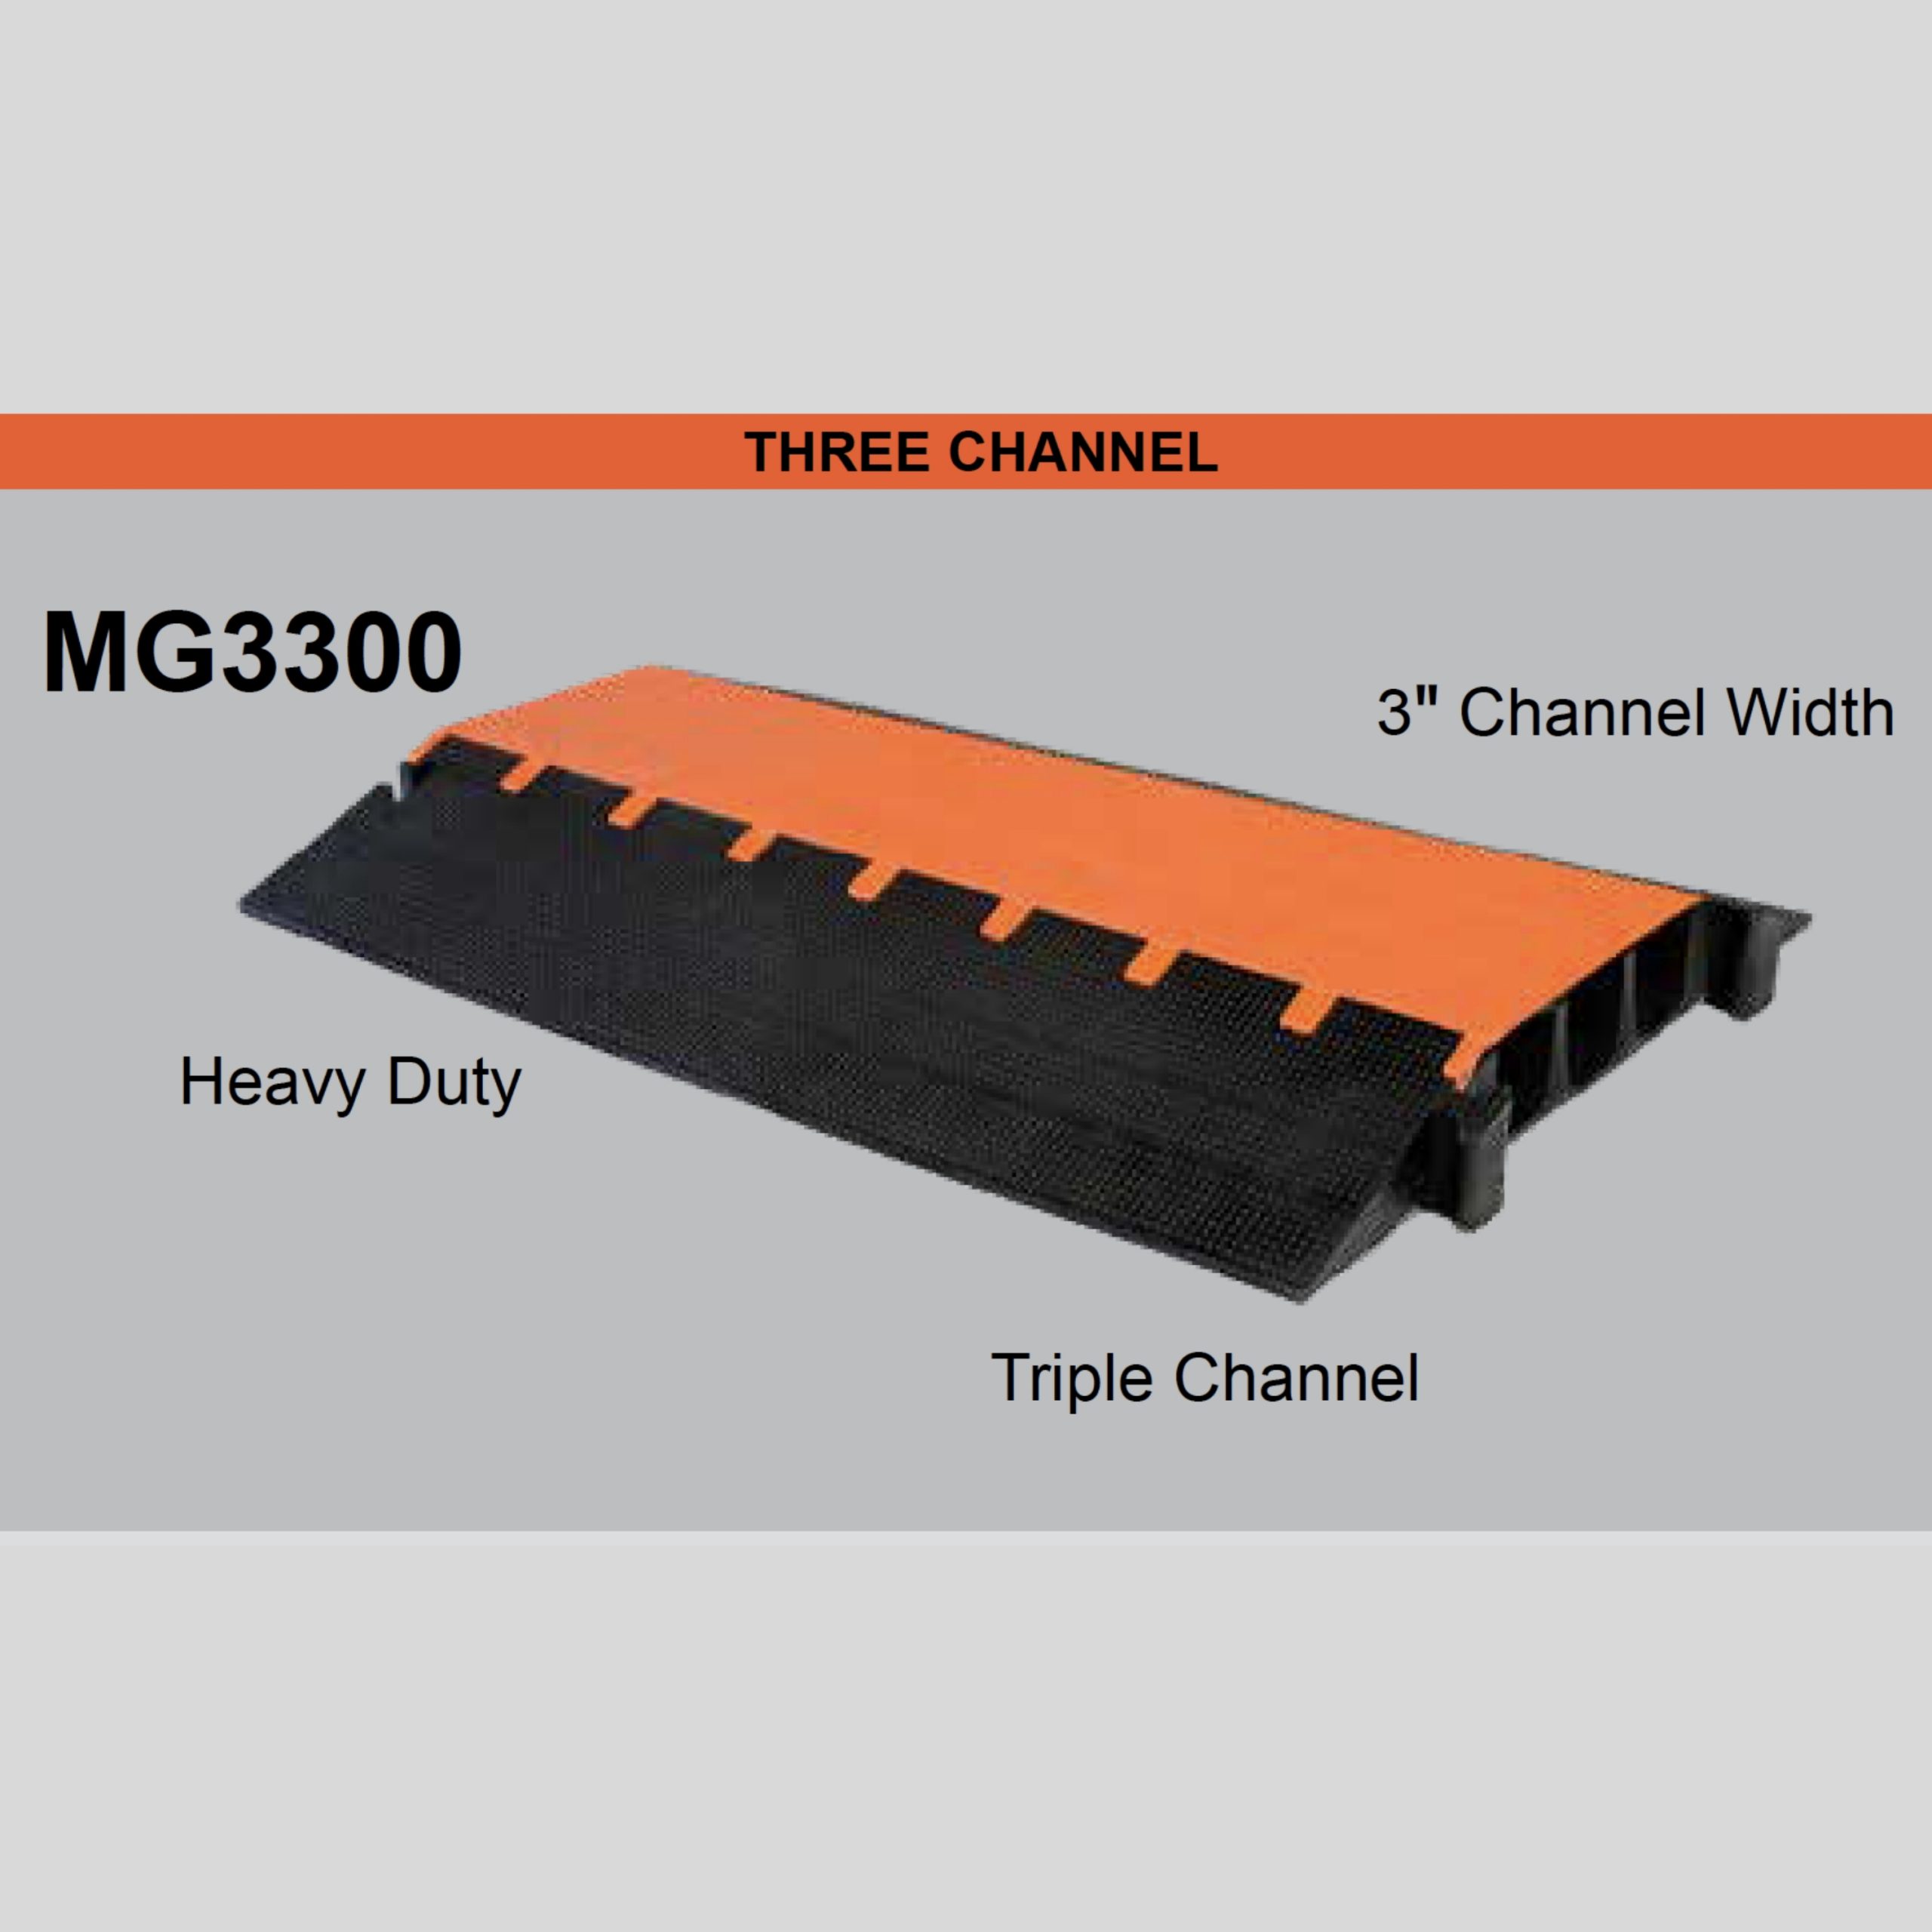 https://www.cableprotectorworks.com/wp-content/uploads/2021/04/Elasco-Products-Mighty-Guard-Cable-Ramp-MG3300-3-scaled.jpg